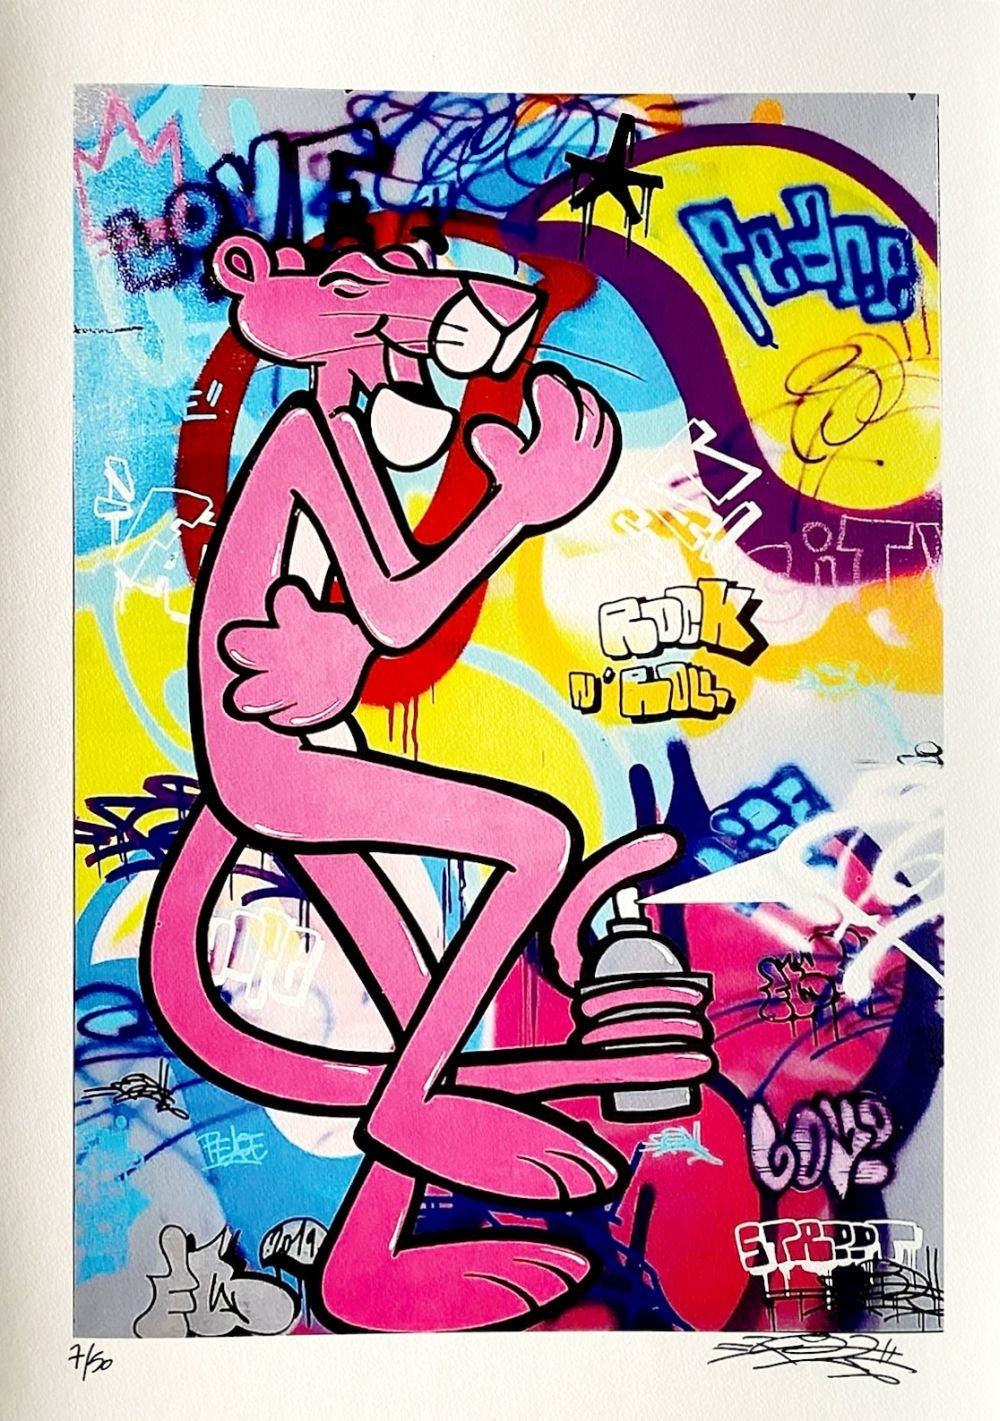 Pink Panther Retro / Aesthetic Poster for Sale by fathinm